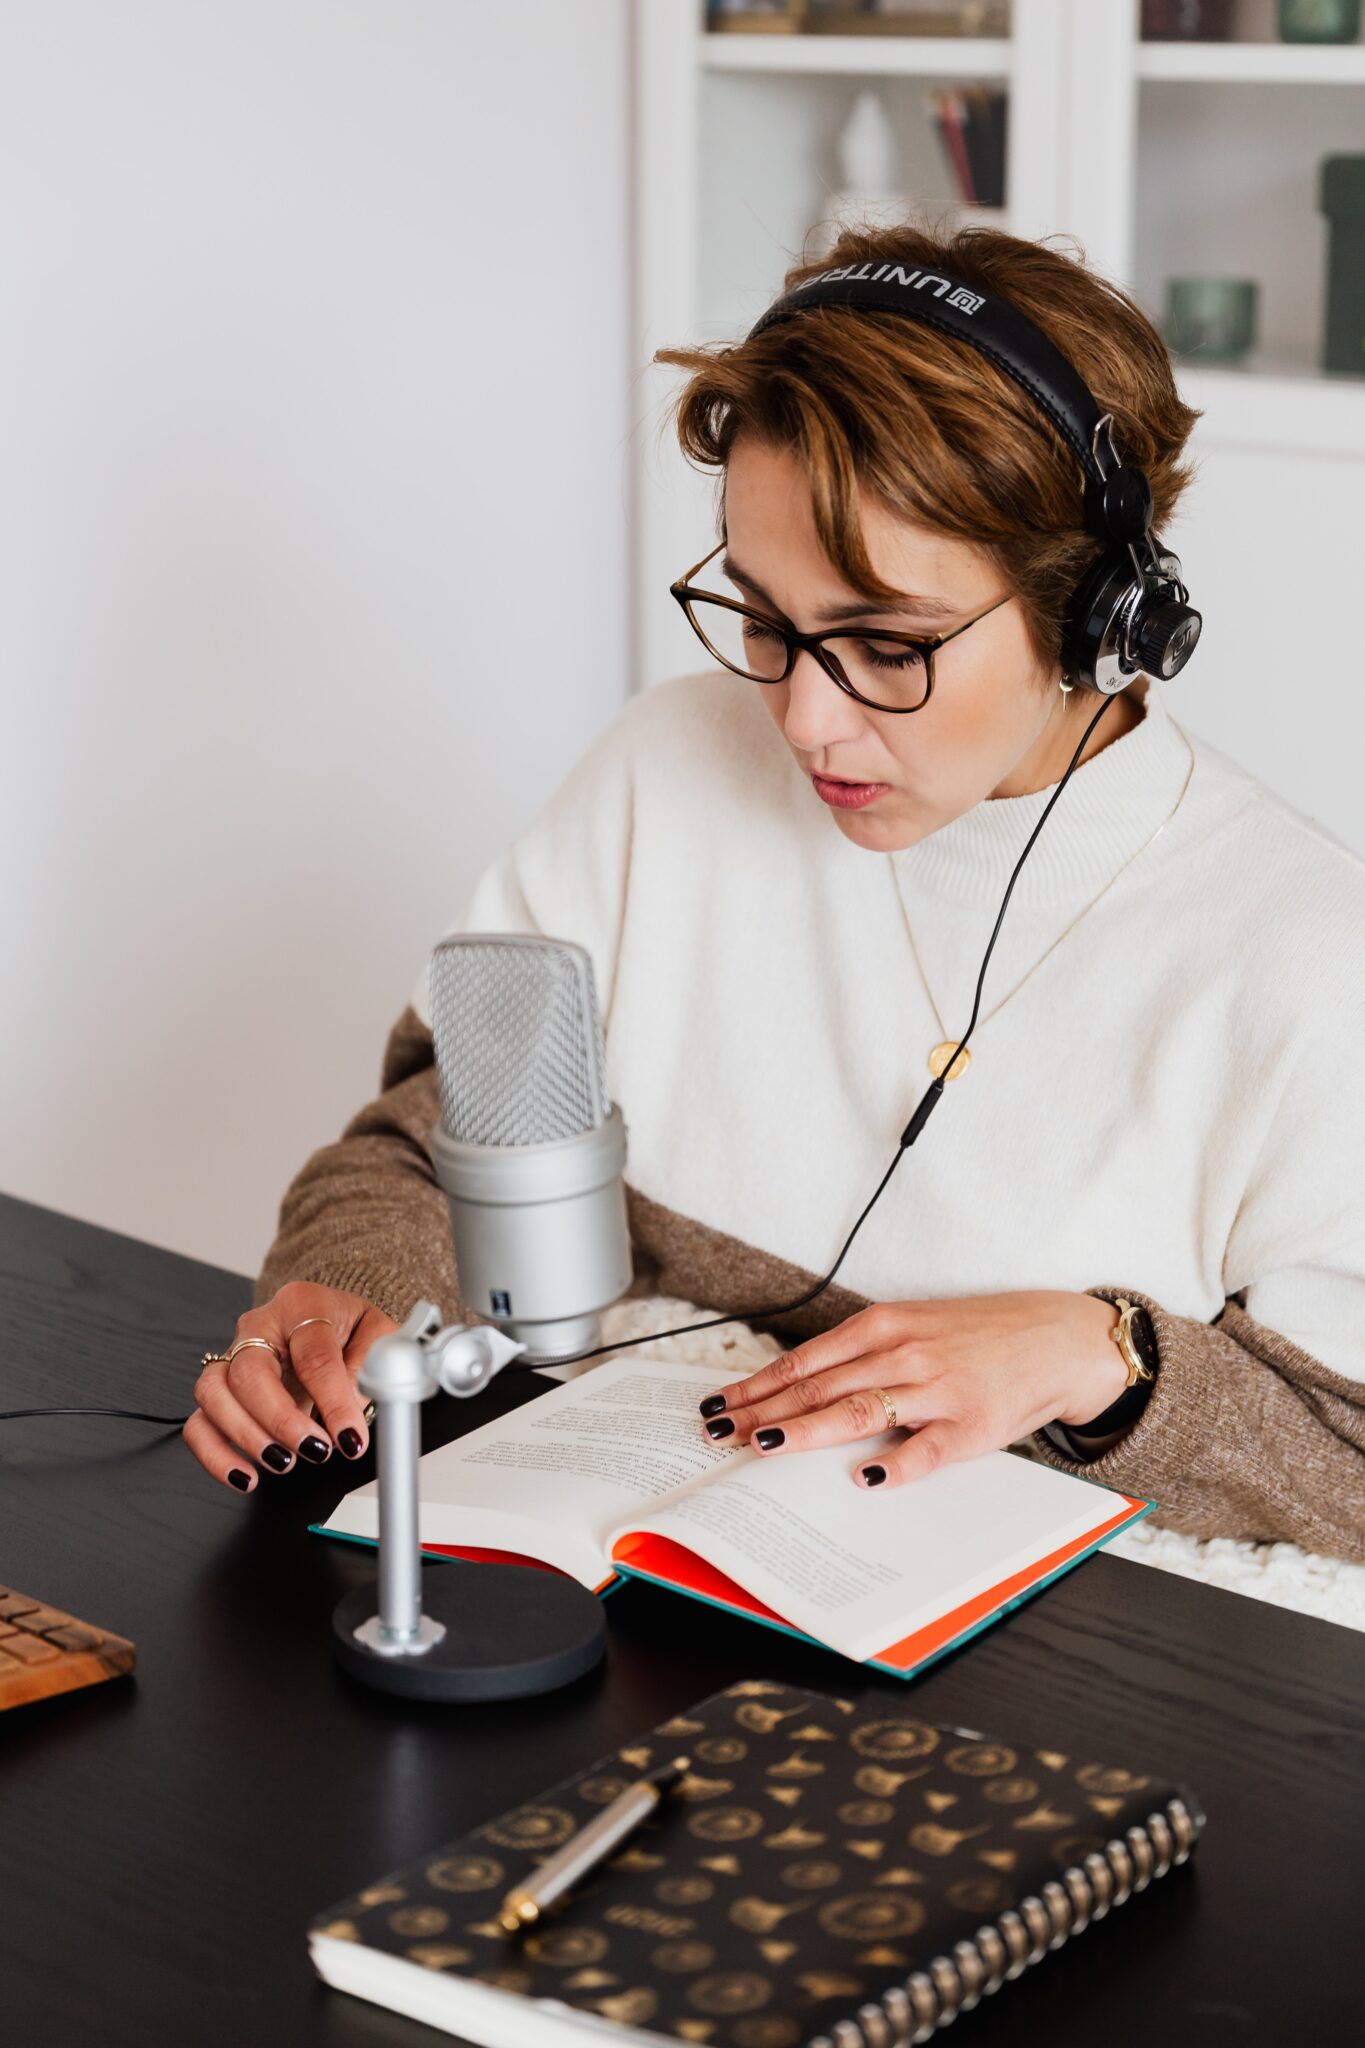 Interpretation requires a lot of concentration on the interpreters part, and usually a quiet room to focus in.

A person is sitting at a desk and speaking in front of a microphone, reading from a book, with headphones on.